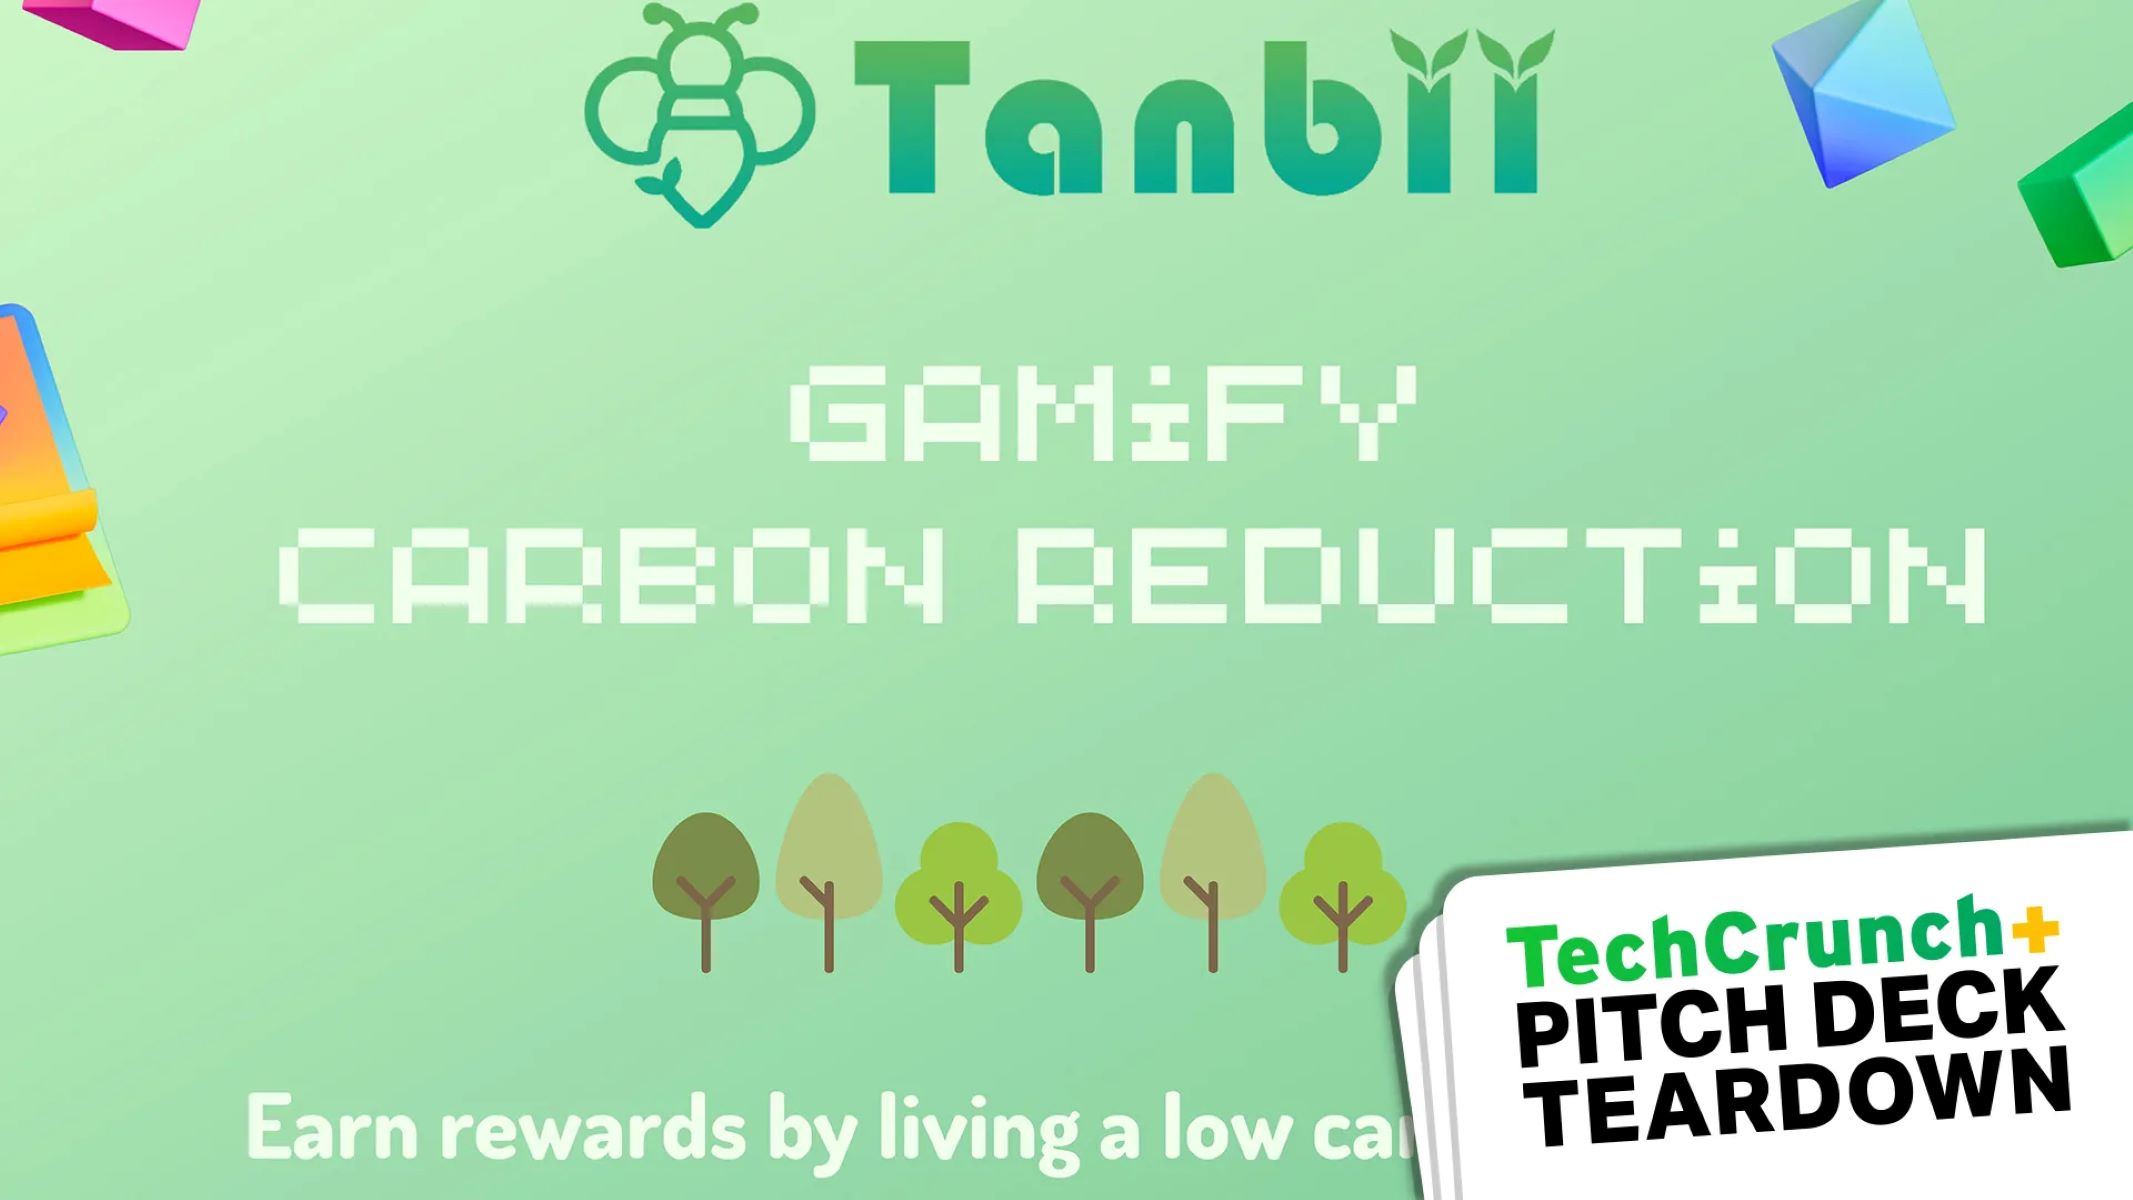 tanbiis-1-5m-pre-seed-deck-a-closer-look-at-the-carbon-reduction-startup